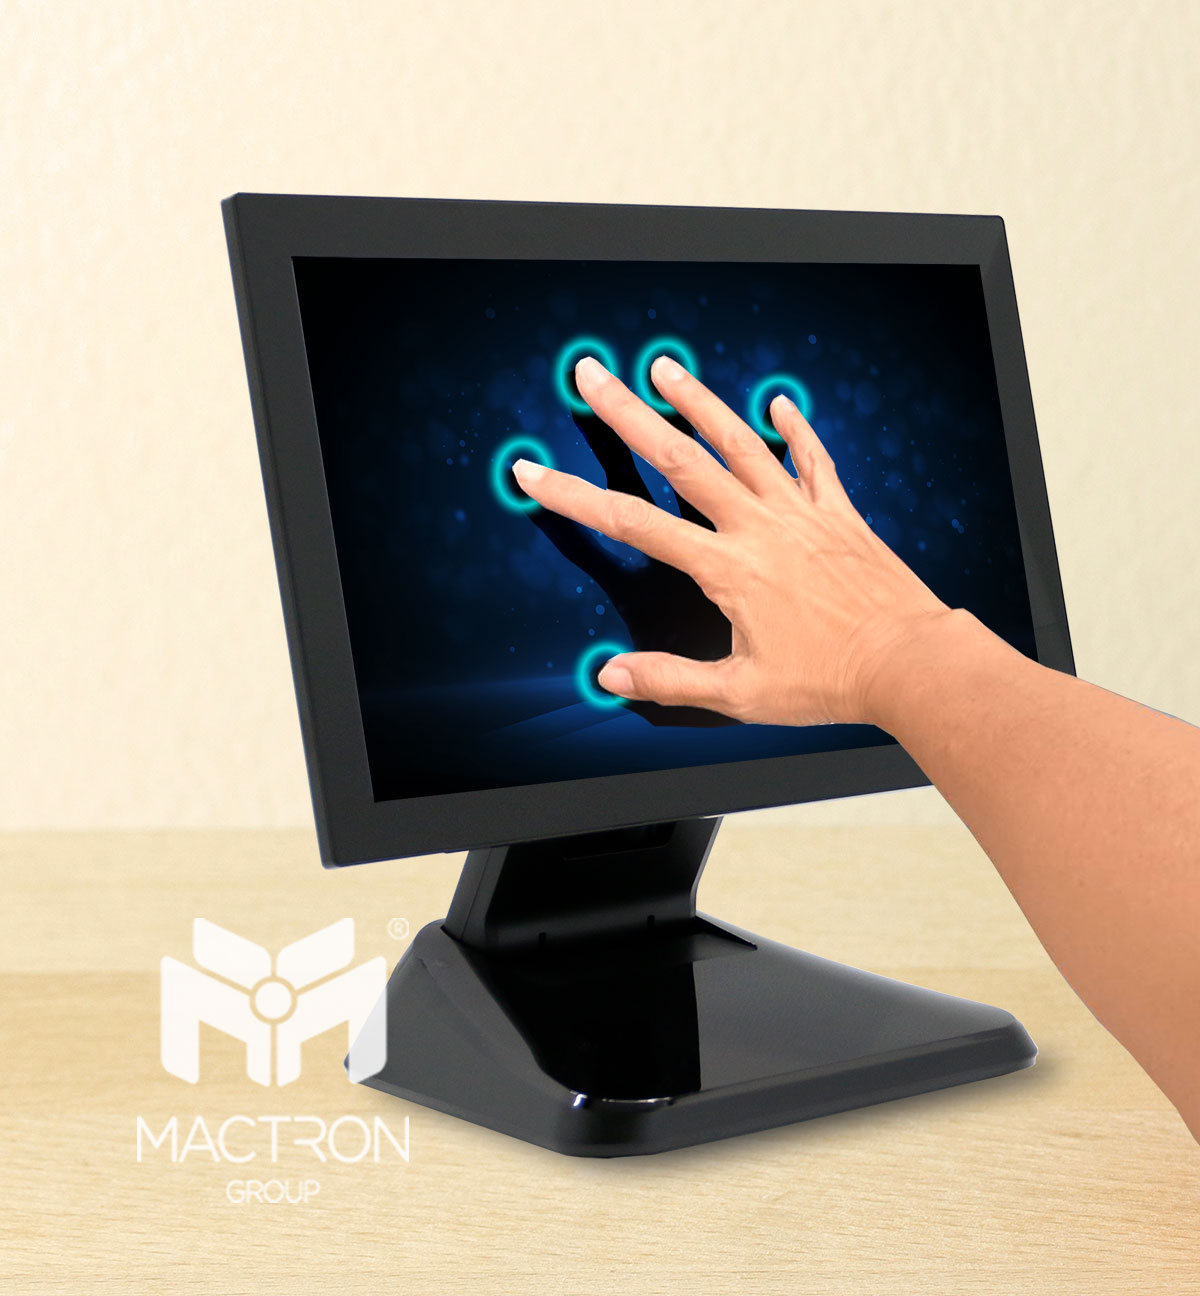 Panel PCs support 5/10-point multi-touch